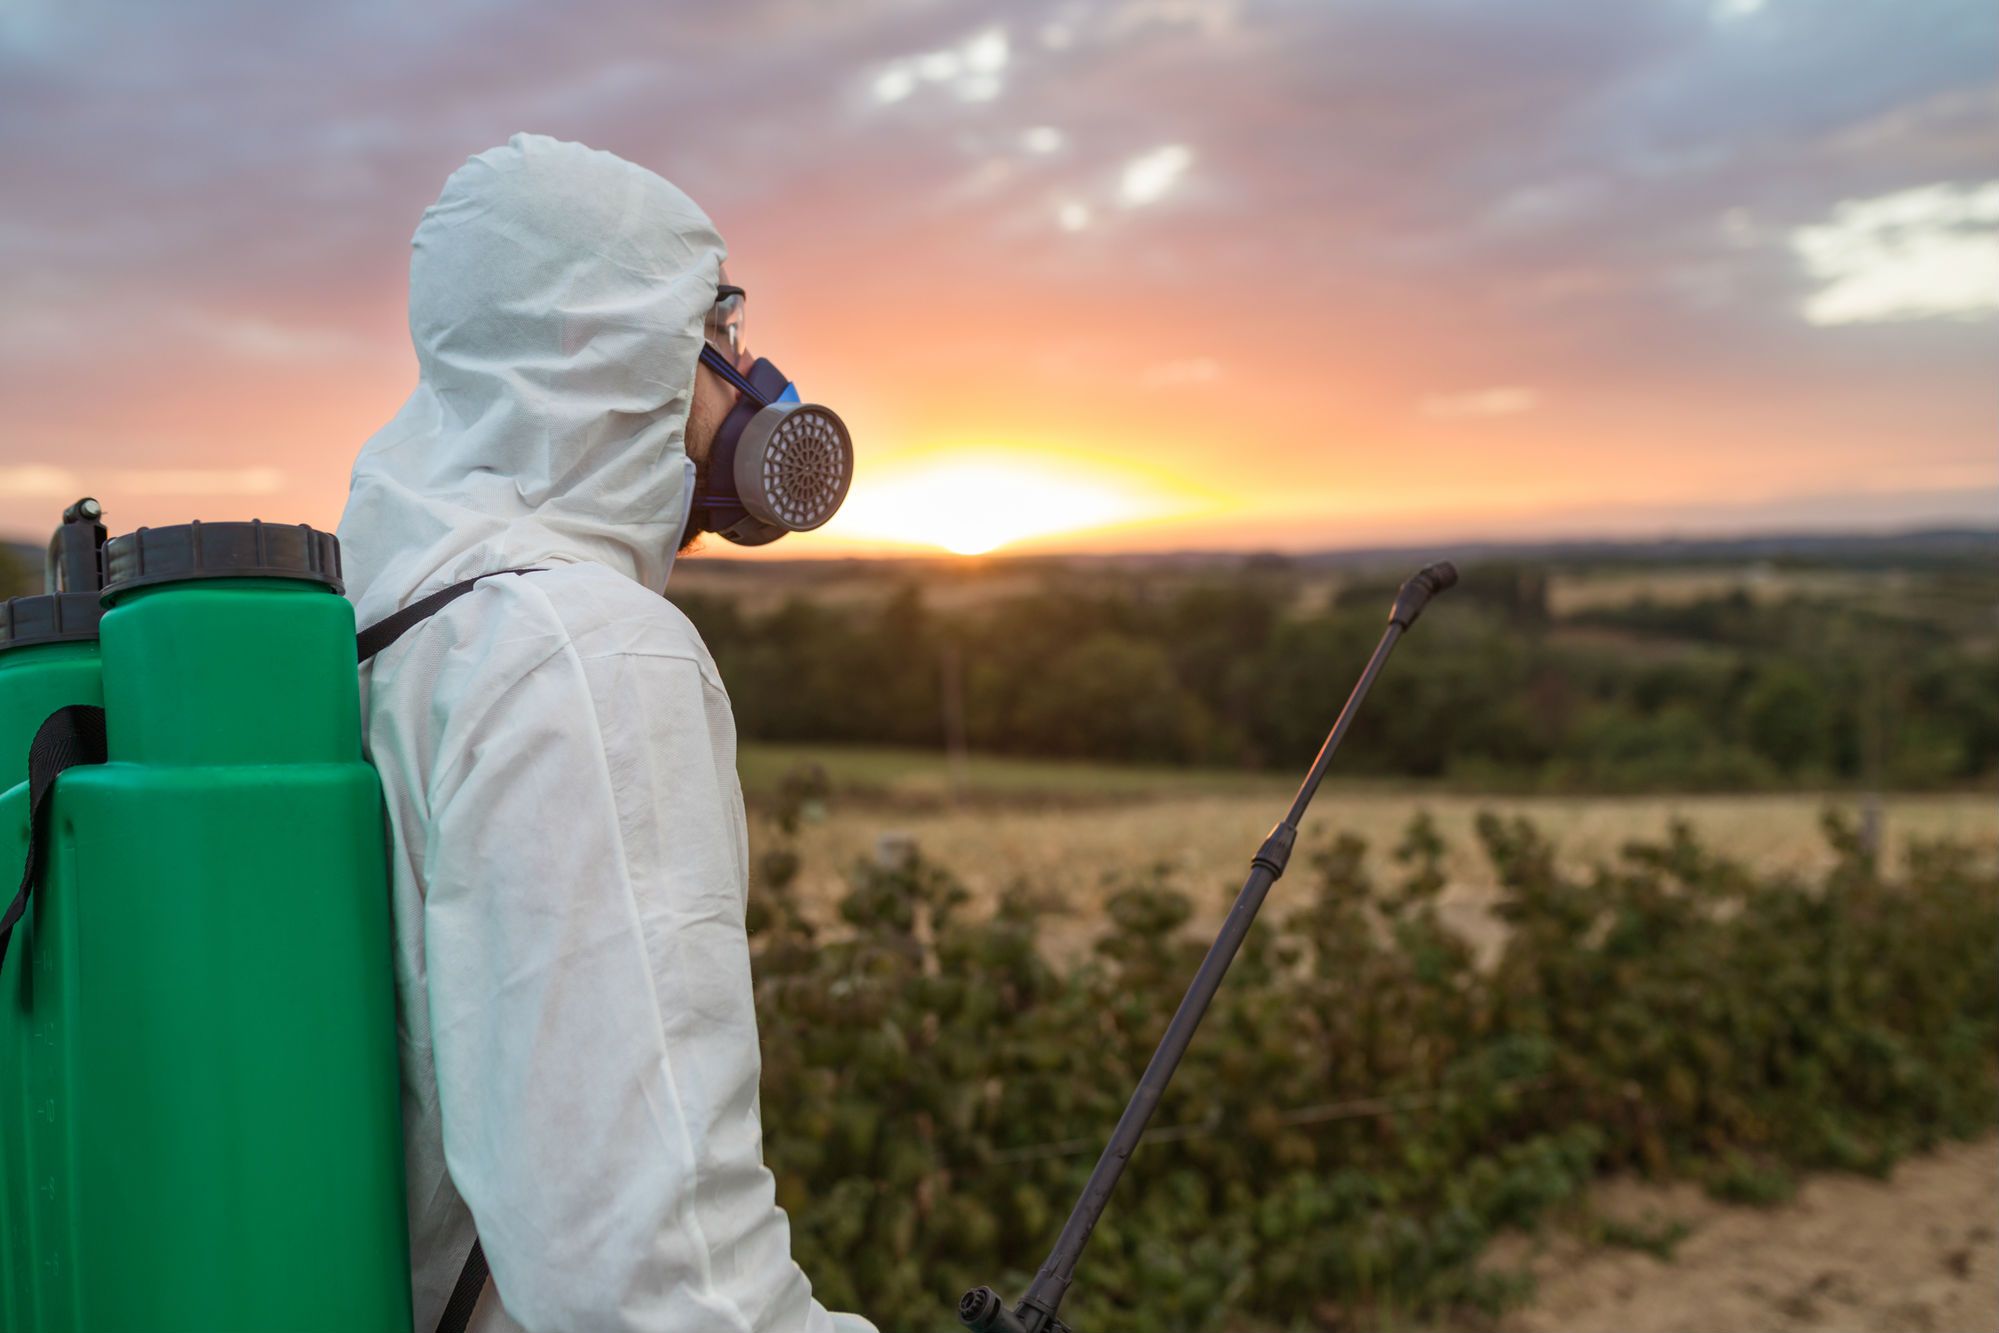 A new verdict could support the Roundup toxic to humans debate, as two plaintiffs were awarded $2 billion for non-Hodgkins lymphoma.